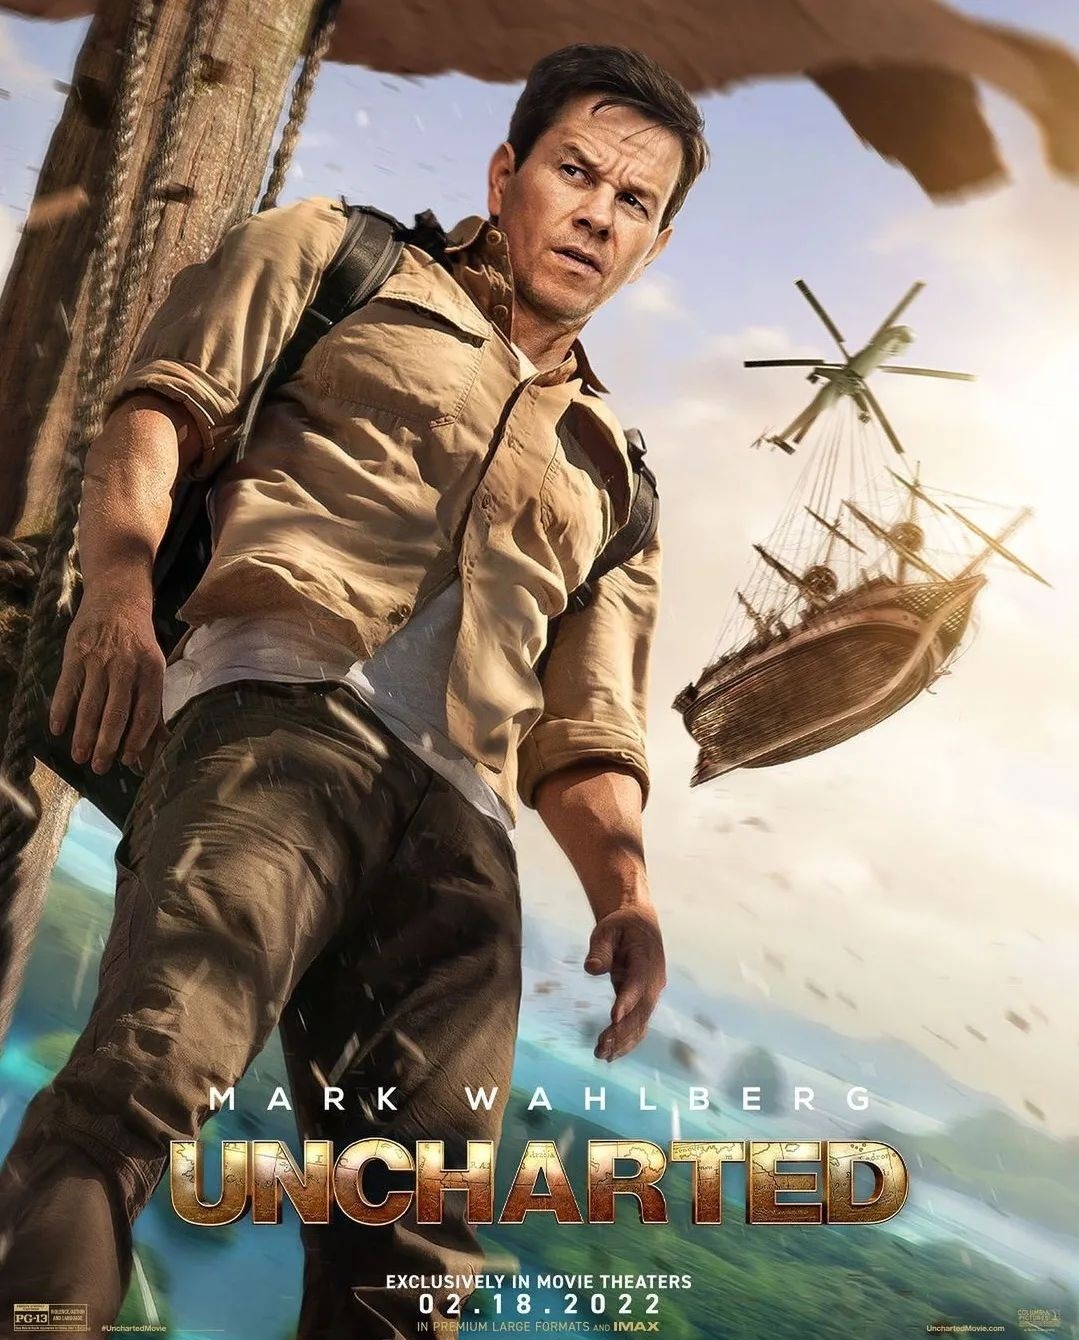 Uncharted (#6 of 8): Extra Large Movie Poster Image - IMP Awards